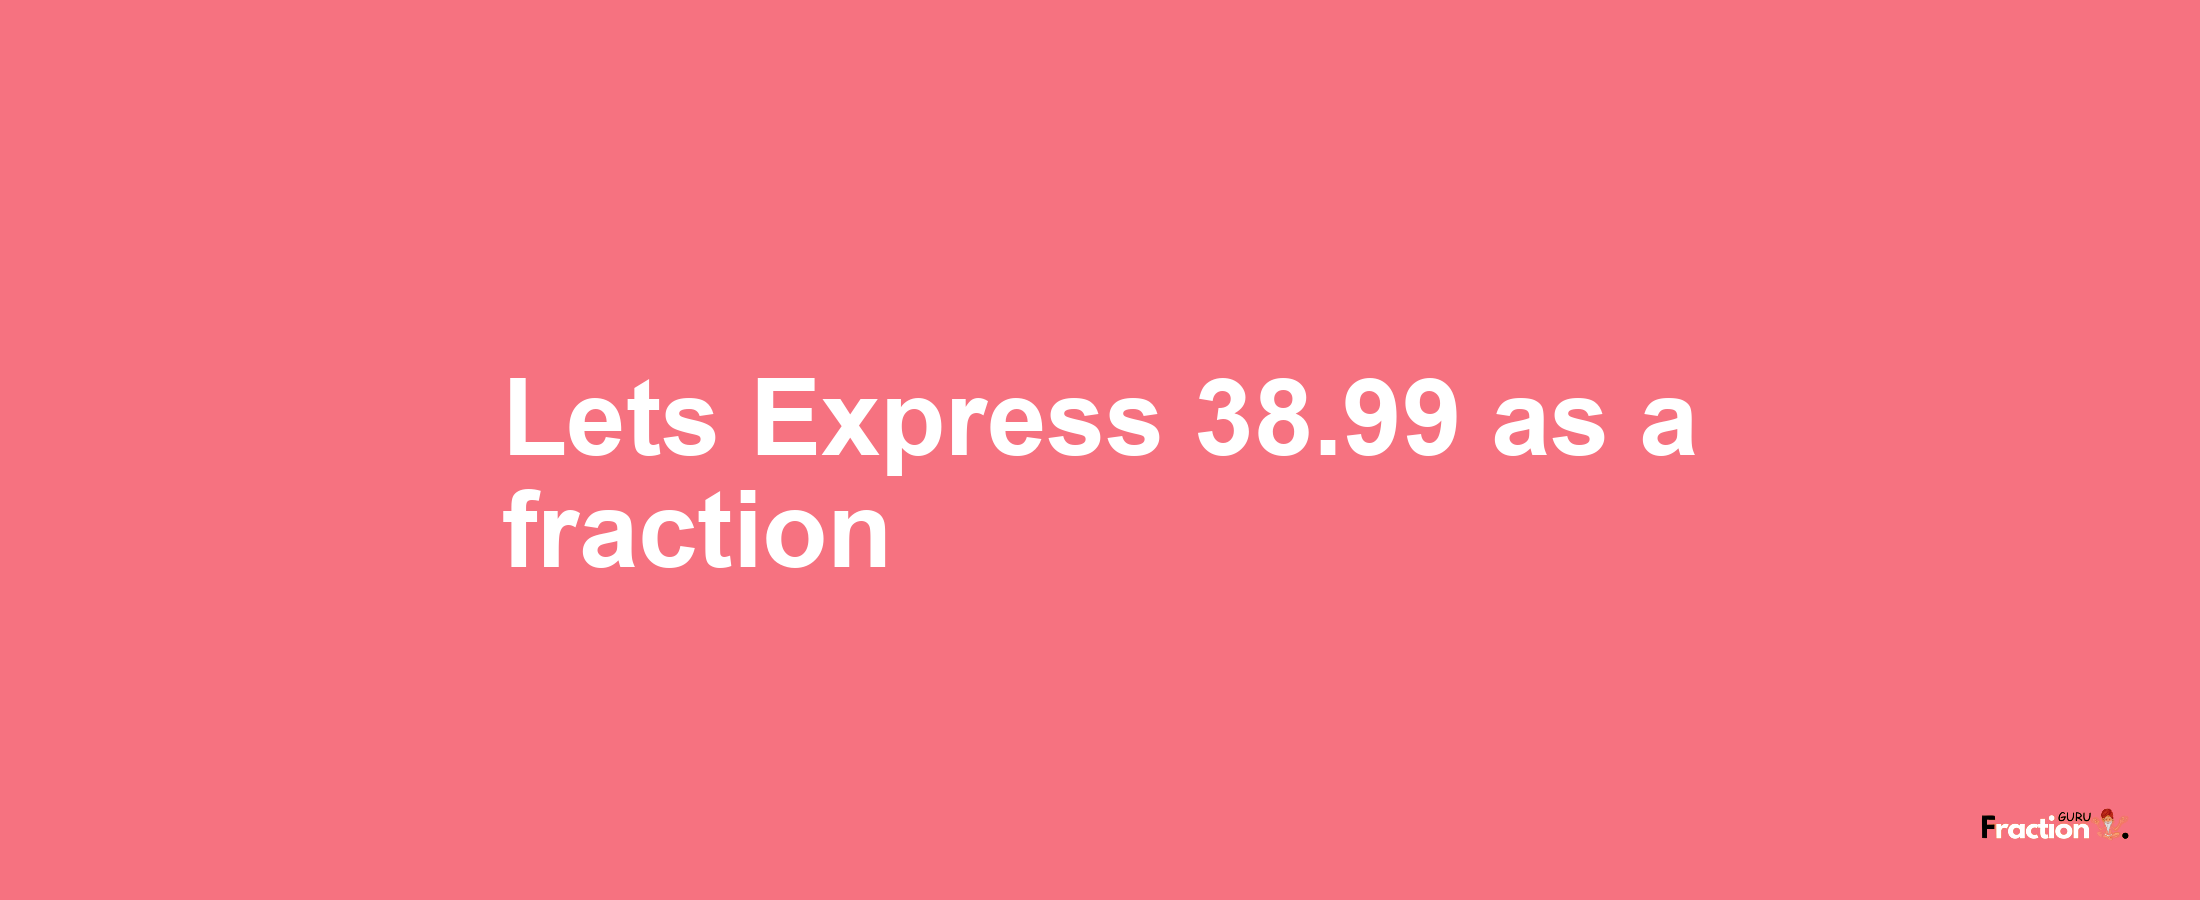 Lets Express 38.99 as afraction